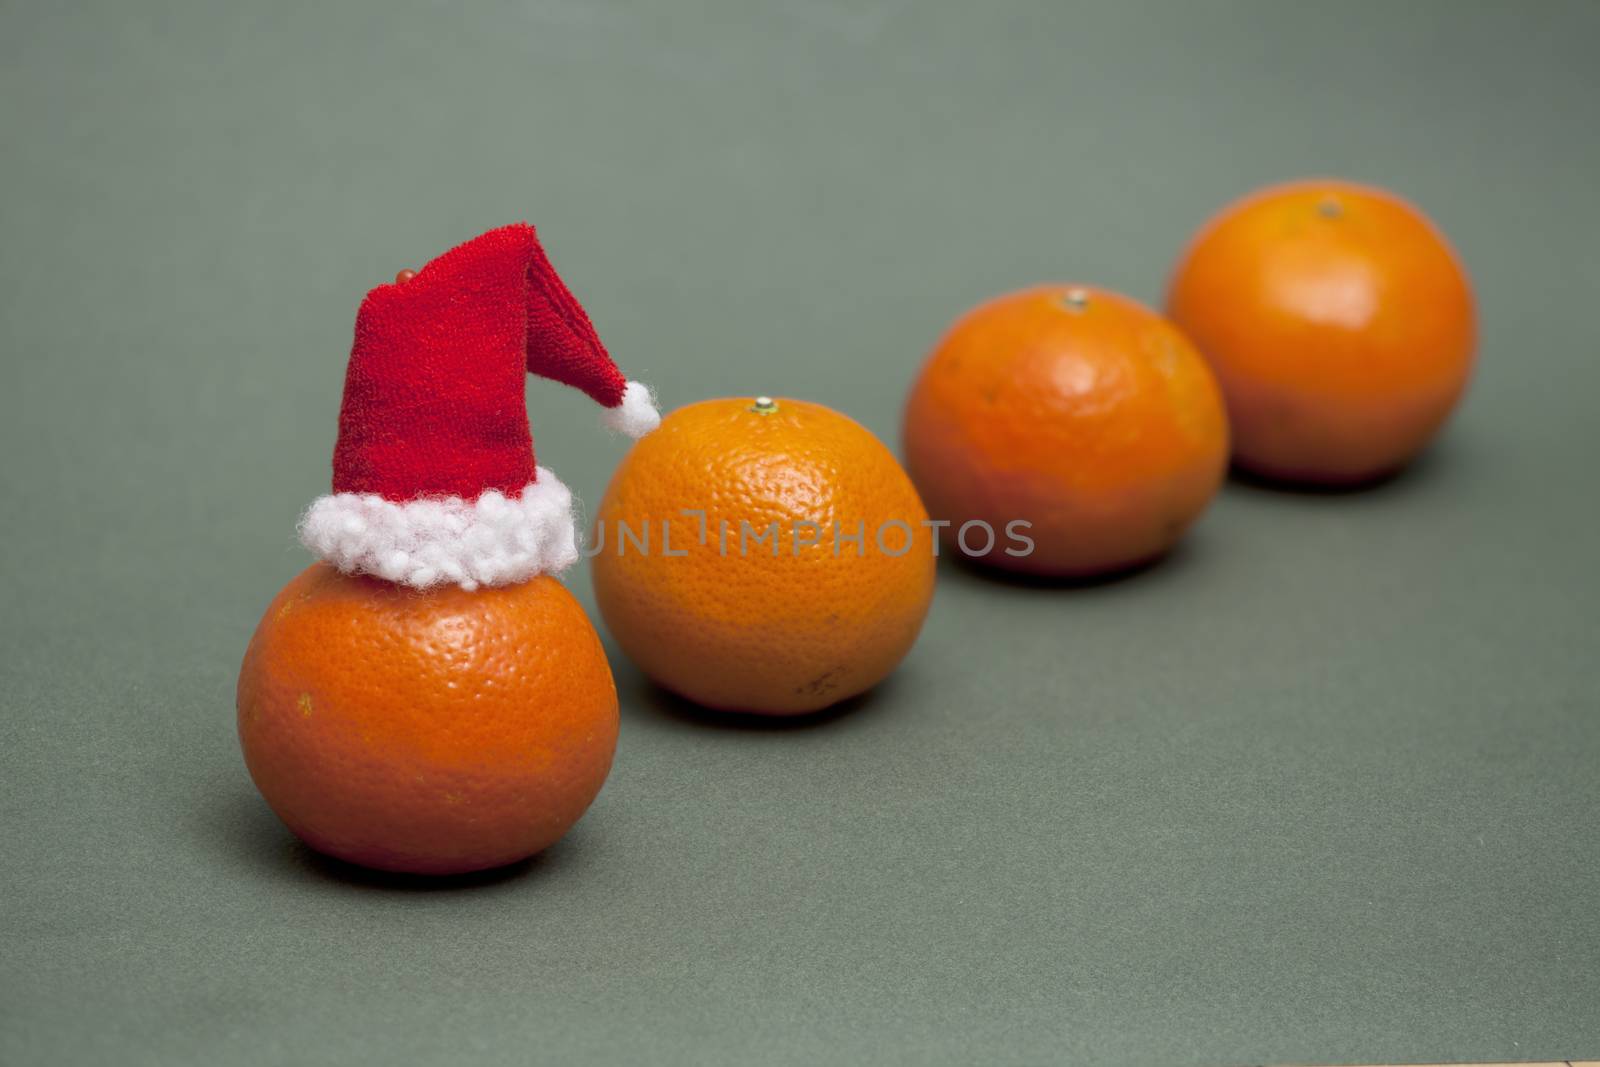 fruit orange santa hat in the foreground, orange in a row, copy space